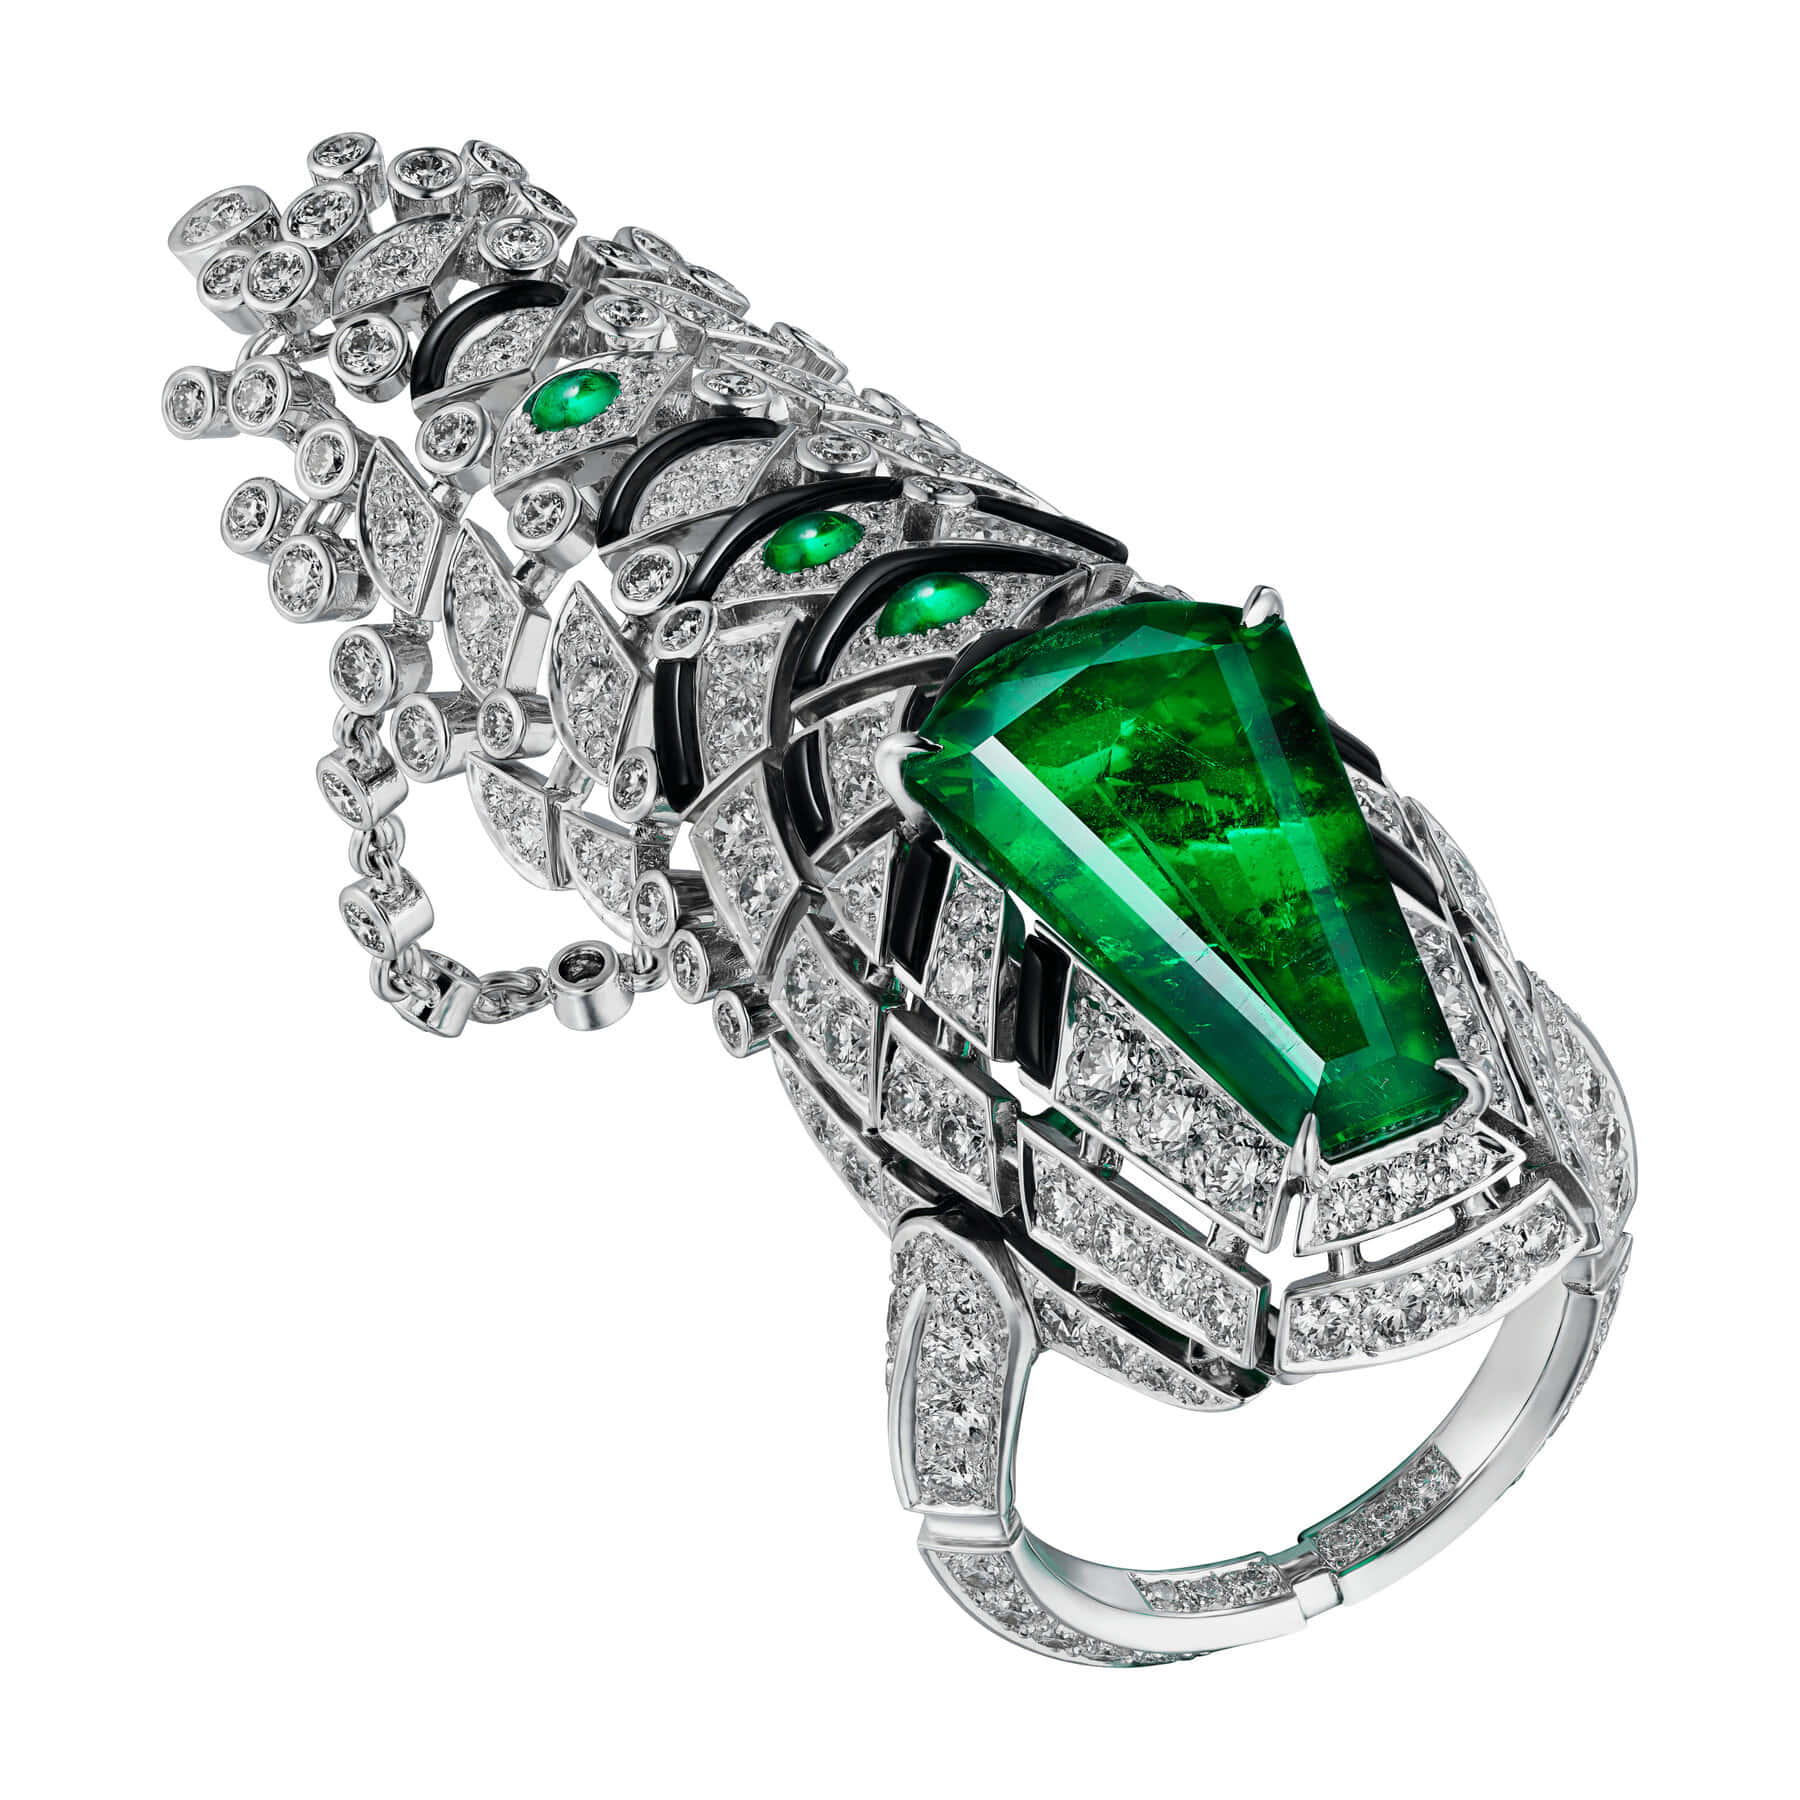 A Ring With Emerald And Diamonds